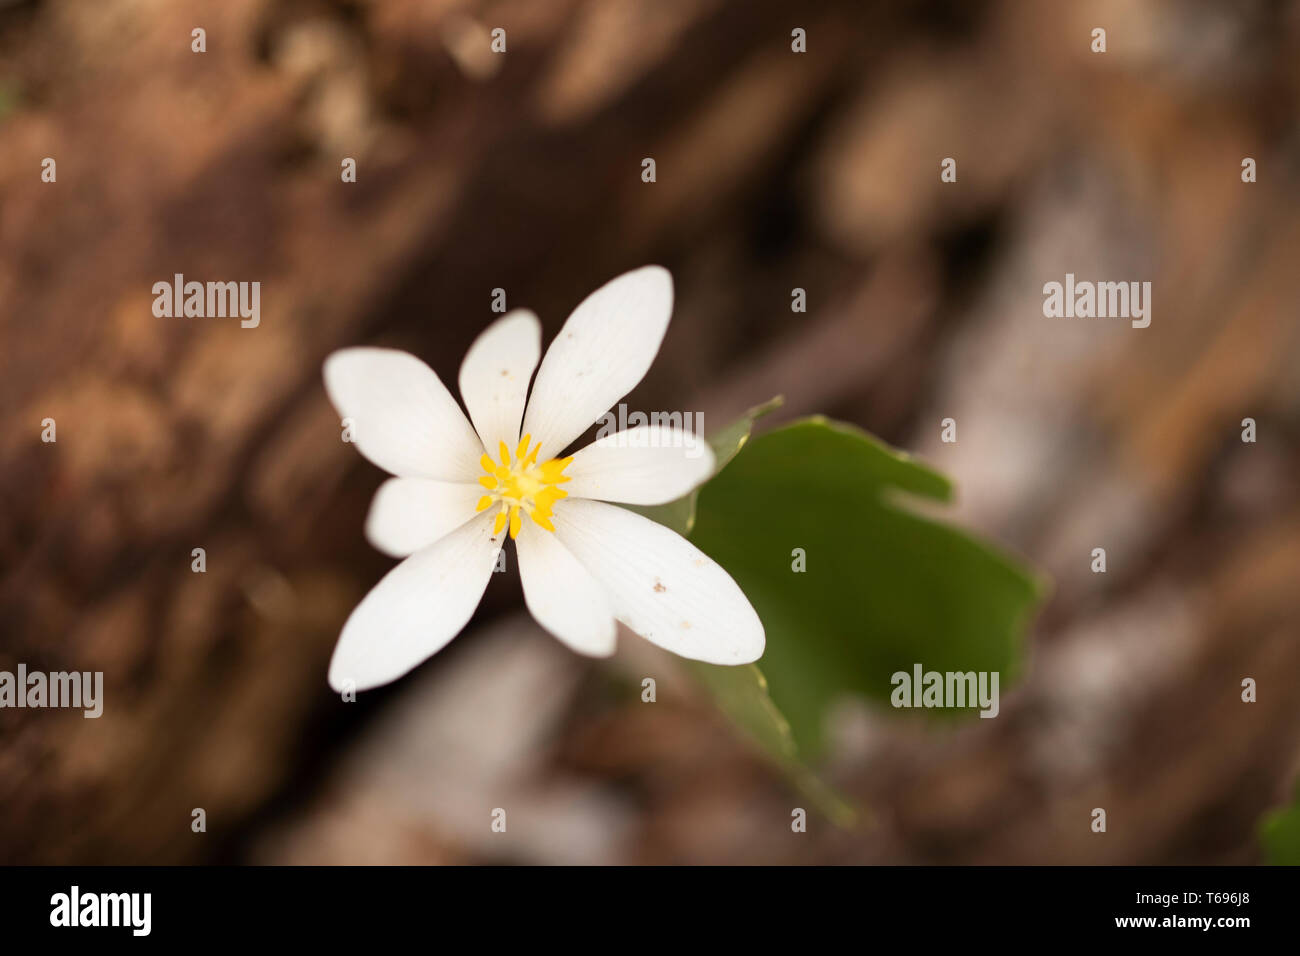 Sanguinaria canadensis, or bloodroot, a perennial, herbaceous flowering plant native to eastern North America. Stock Photo